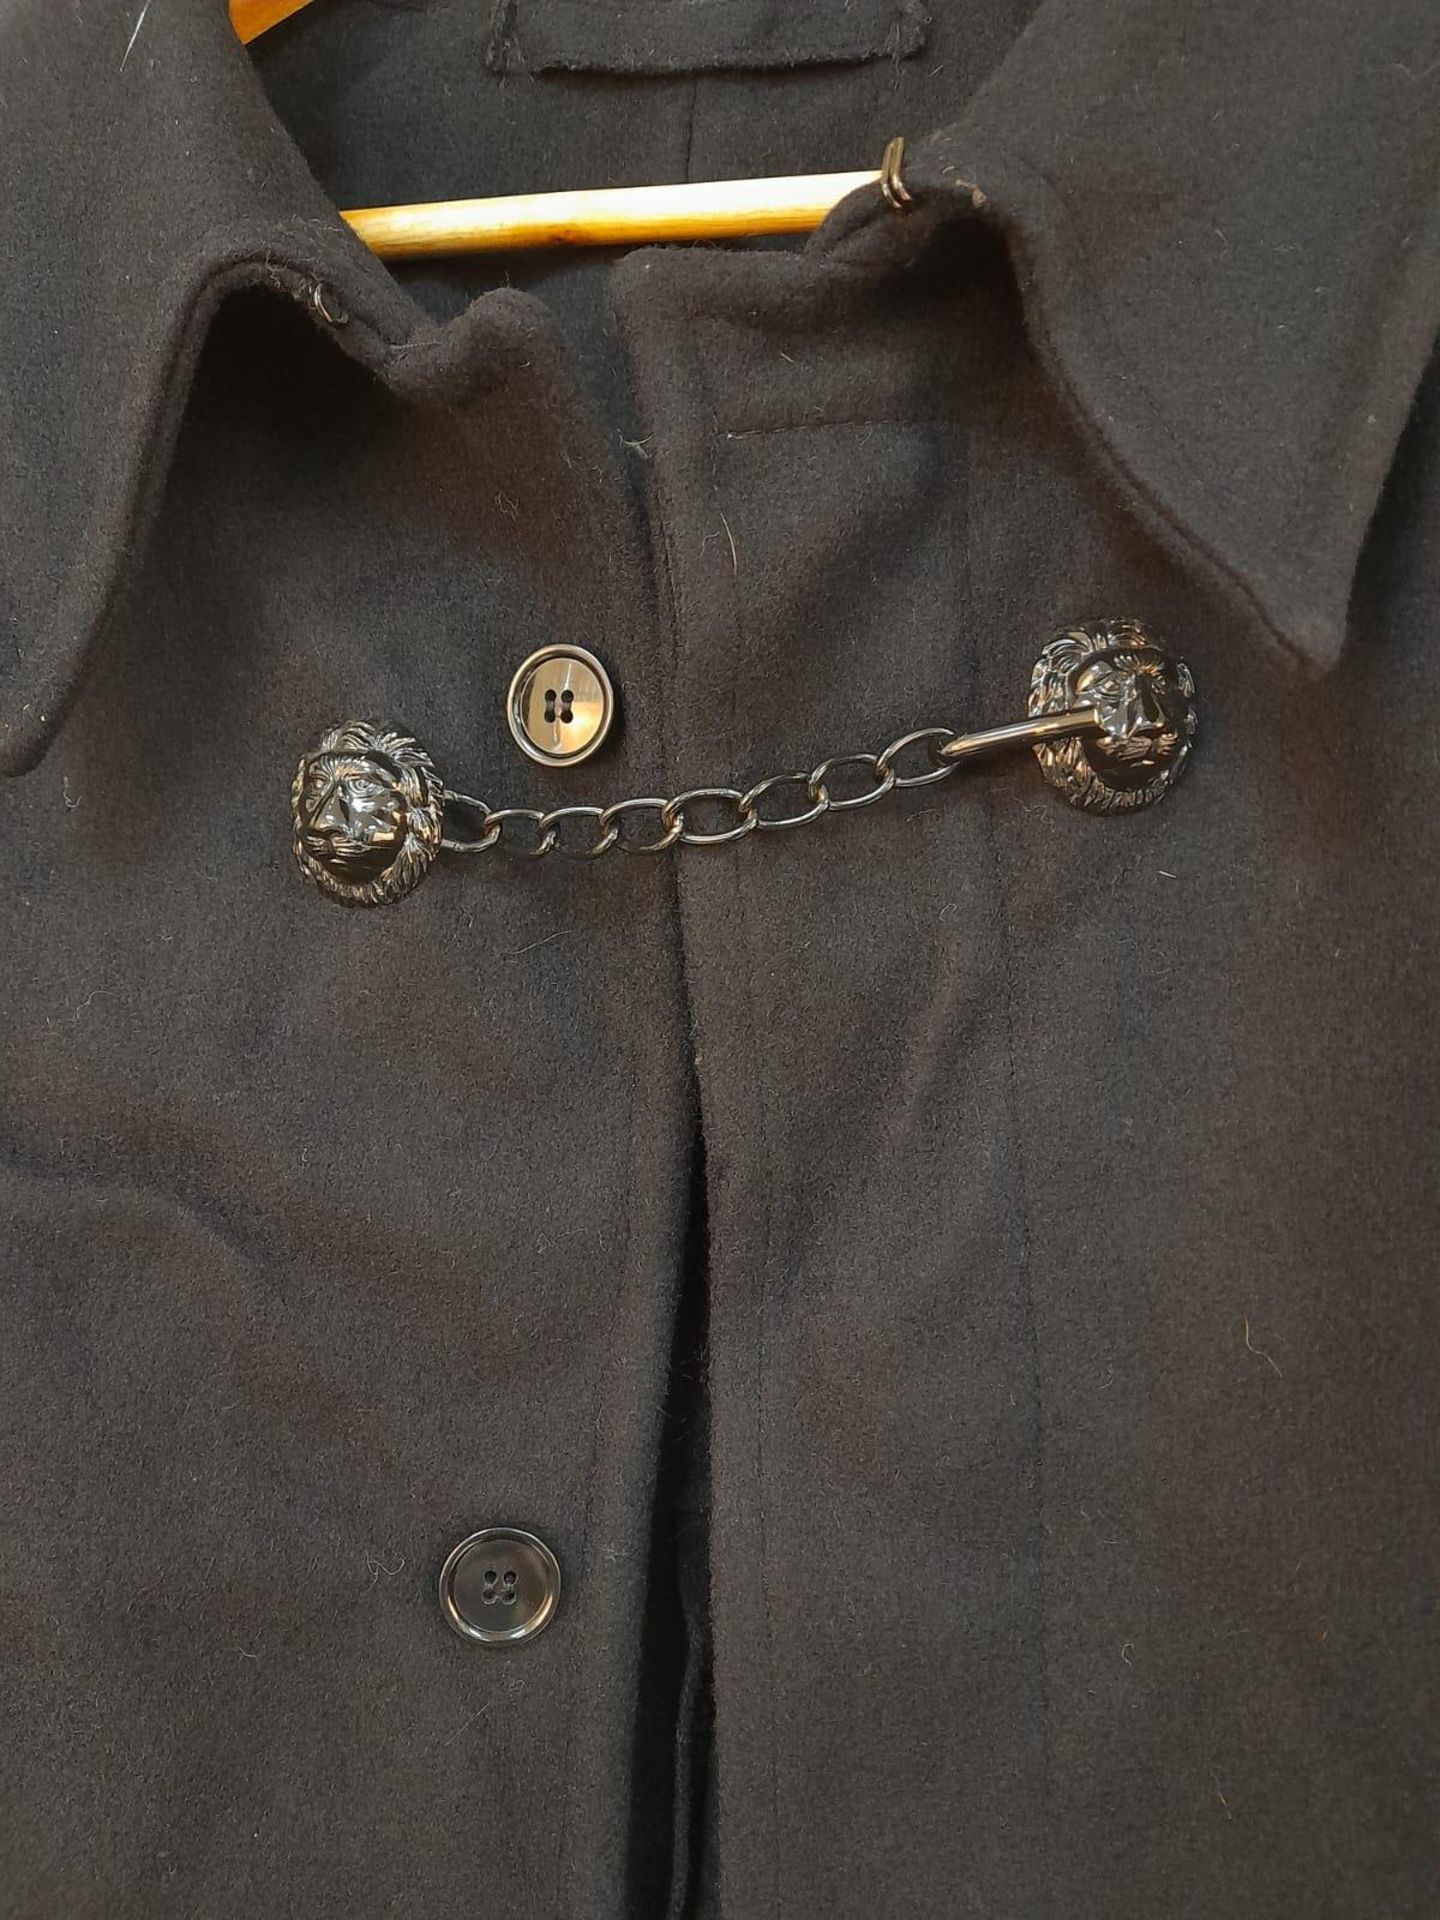 An Antique Victorian Police Officers (Sergeant) High Collar Tunic - With matching vintage trousers - Image 9 of 11